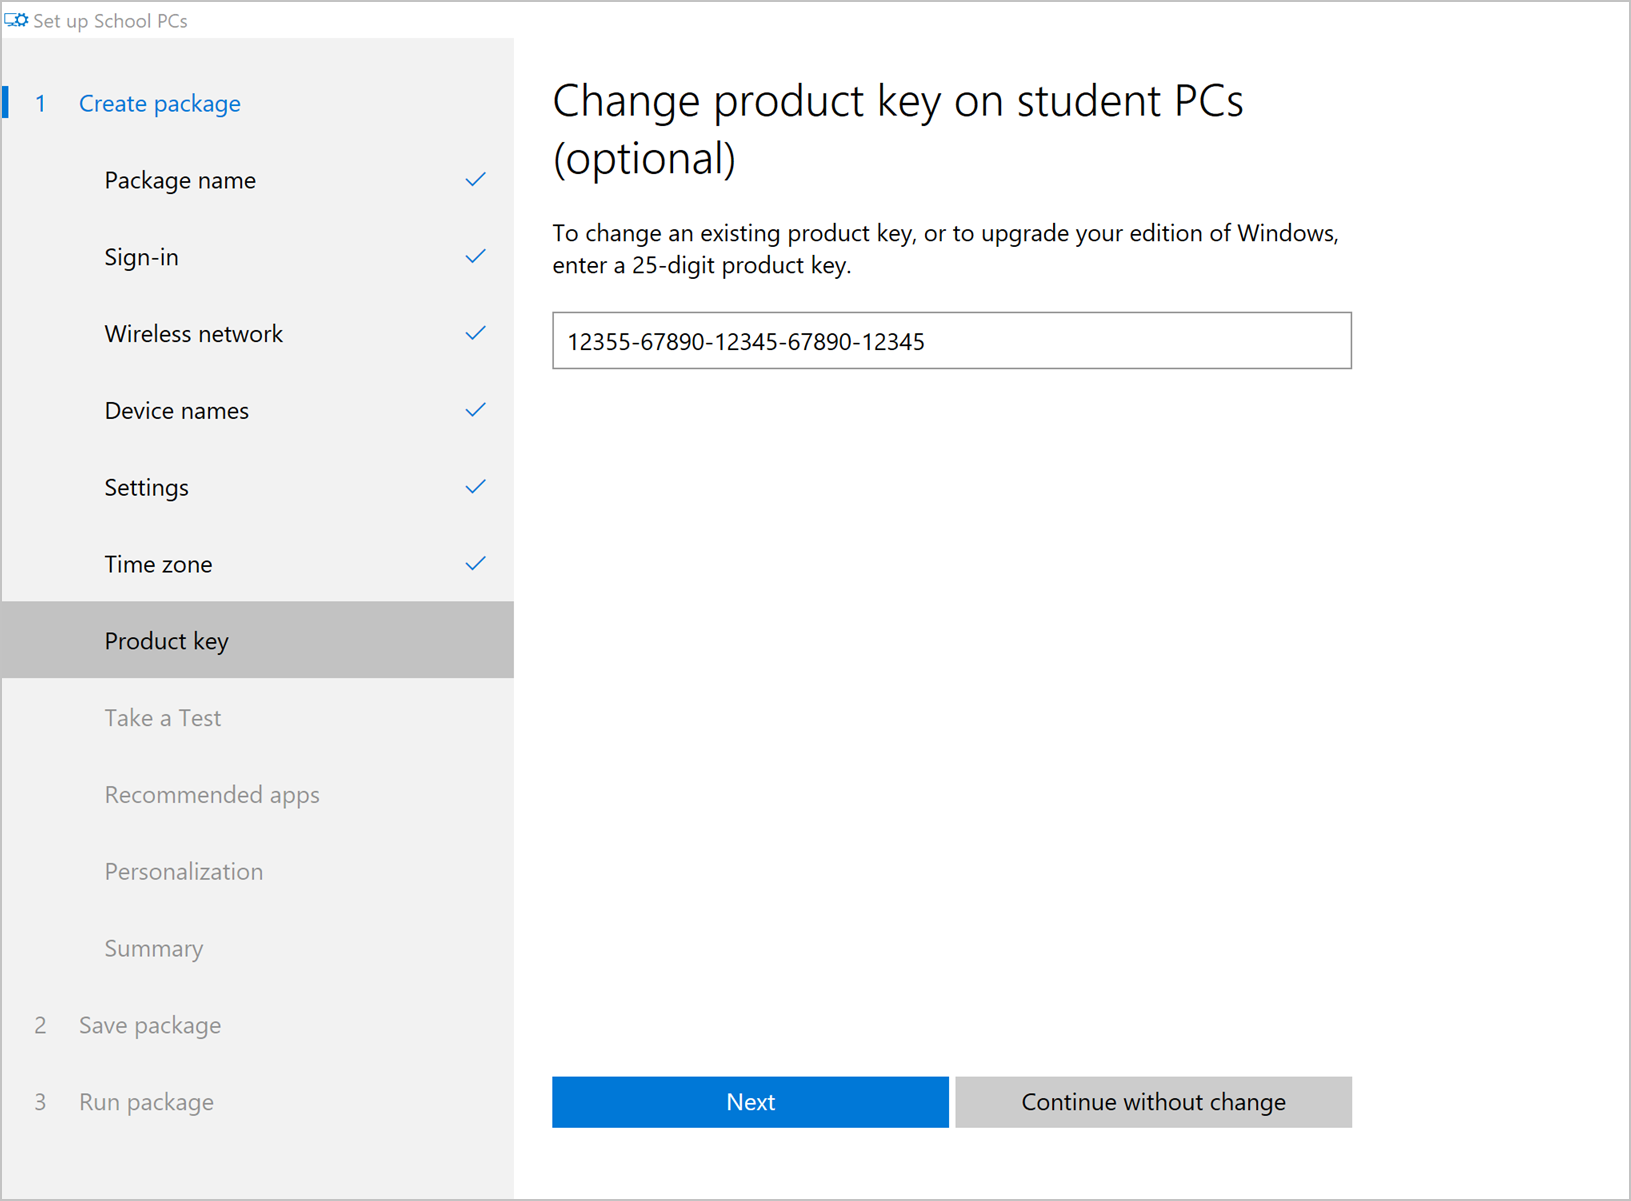 Example screenshot of the Set up School PC app, Product key screen, showing a value field, Next button, and Continue without change option.